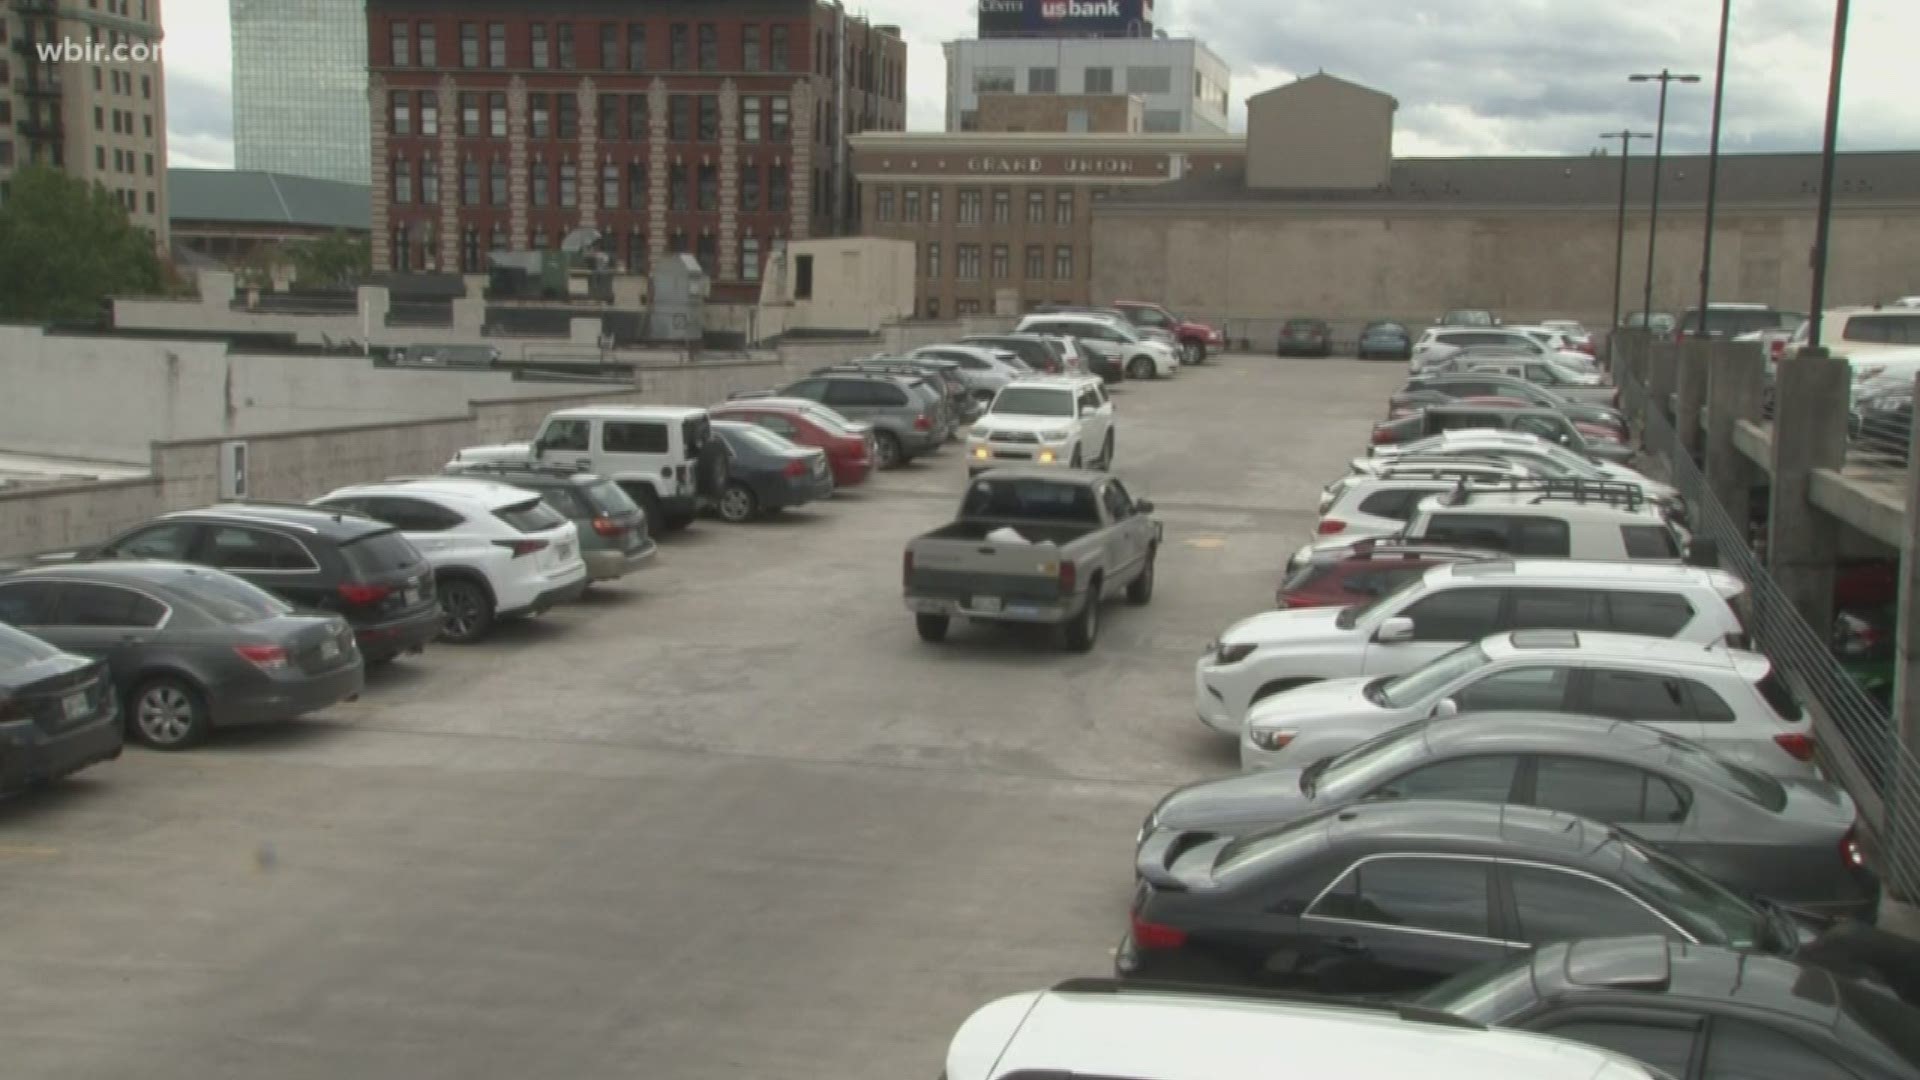 New analysis shows across the city, parking spaces take up 8% of the city's land.